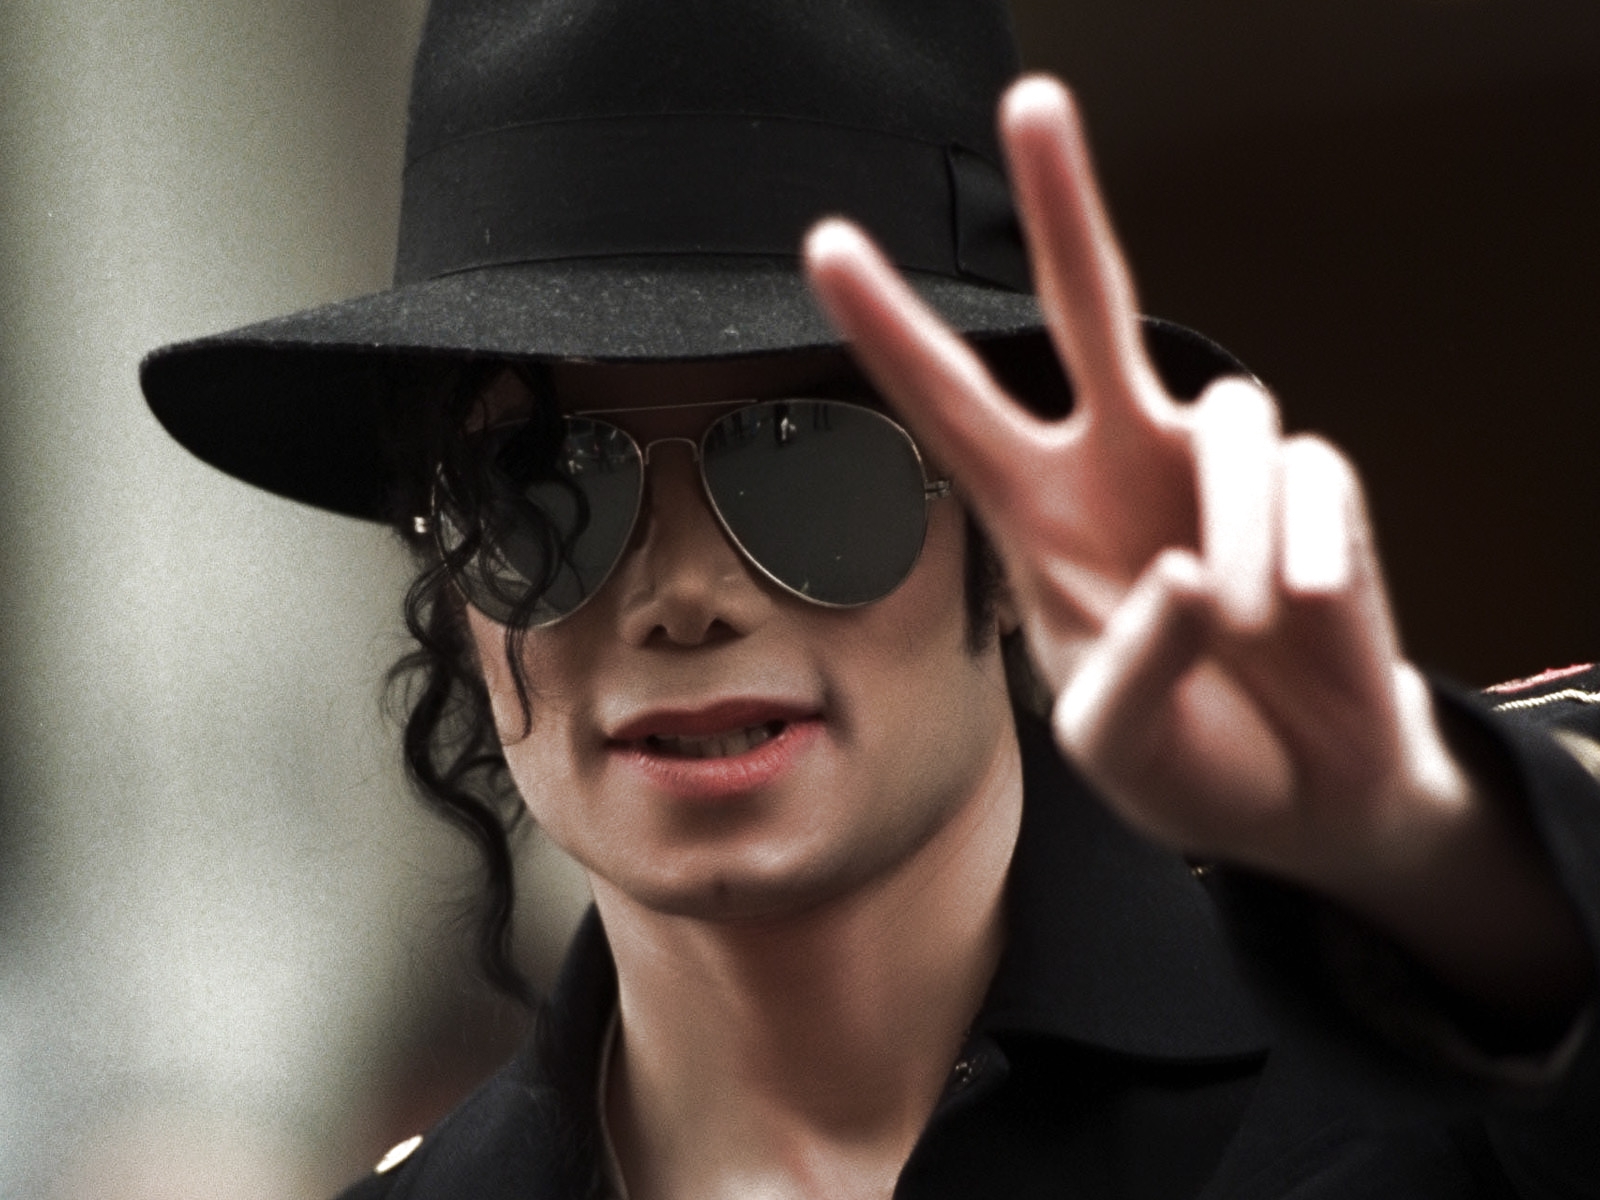 Hold-My-Hand-by-Michael-Jackson